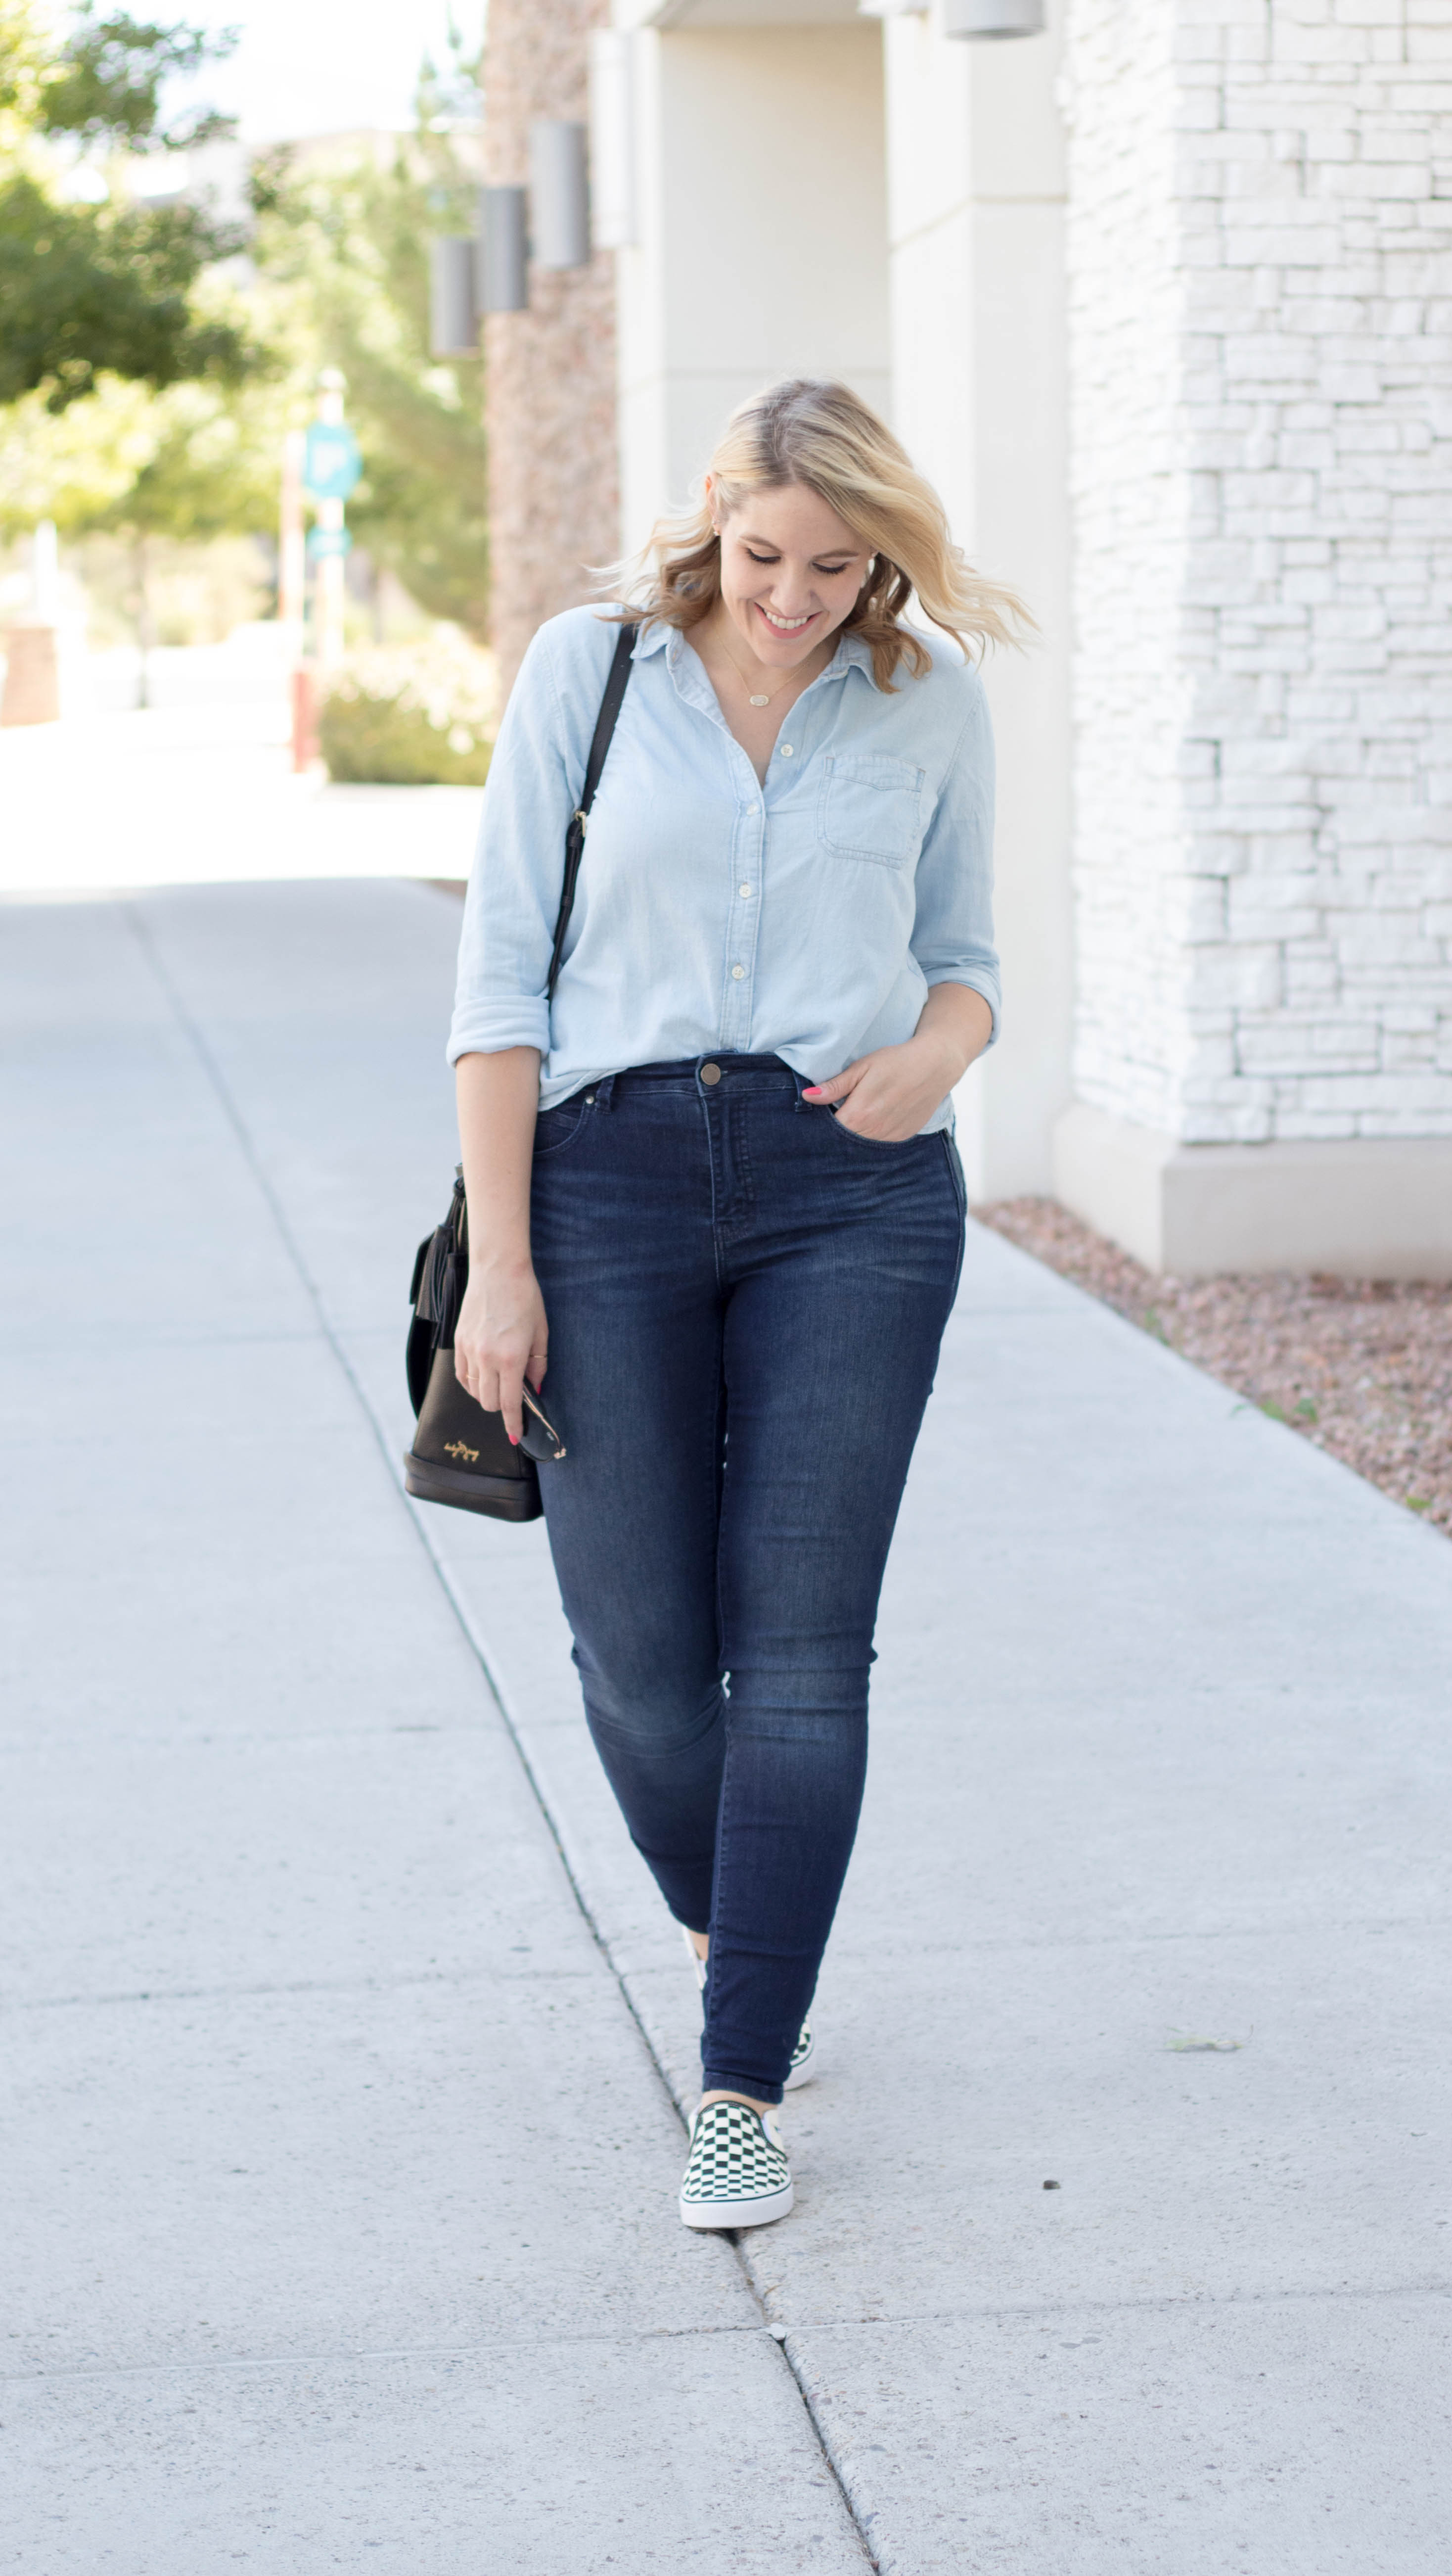 perfect outfit for any mom #momstyle #momfashion #denim